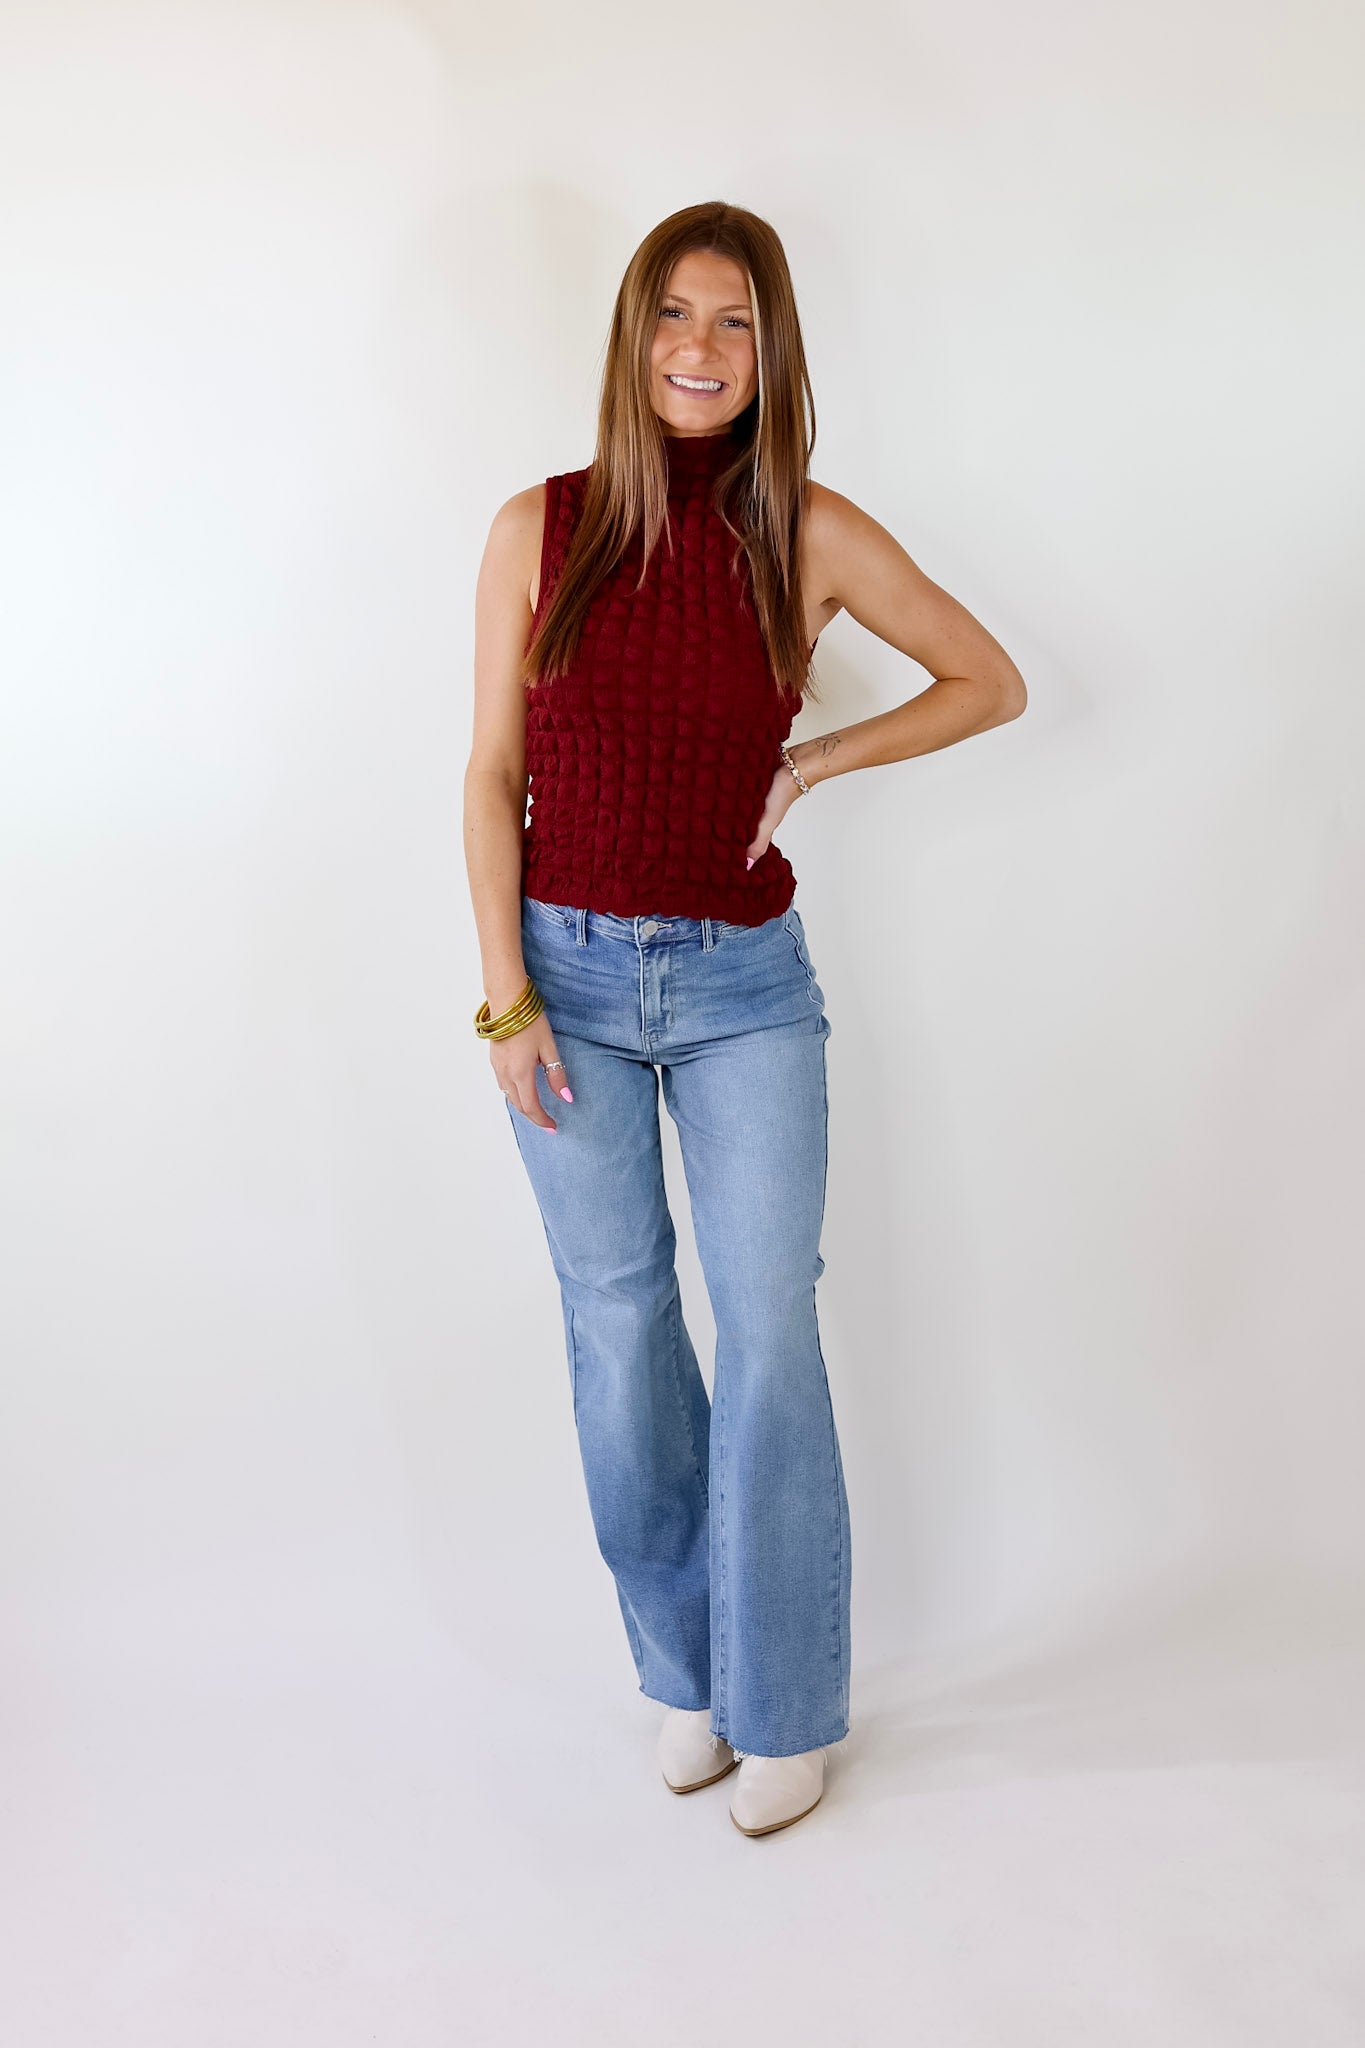 Daring Stares Mock Neck Bubble Tank Top in Maroon - Giddy Up Glamour Boutique